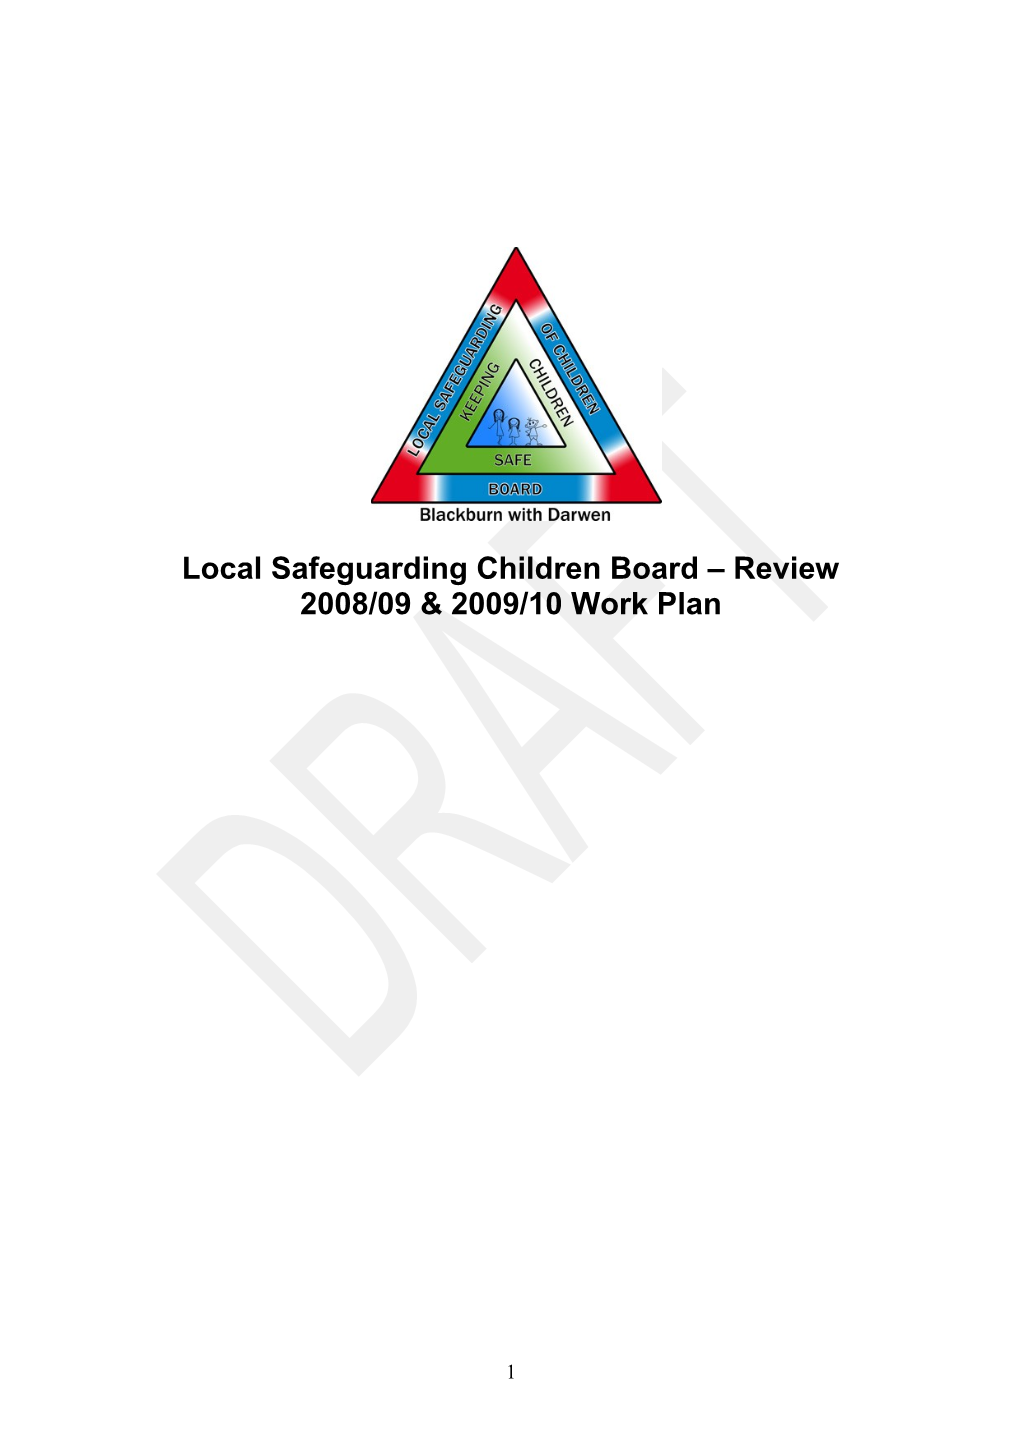 Local Safeguarding Children Board Review 2007/08 & 2008/09 Action Plan